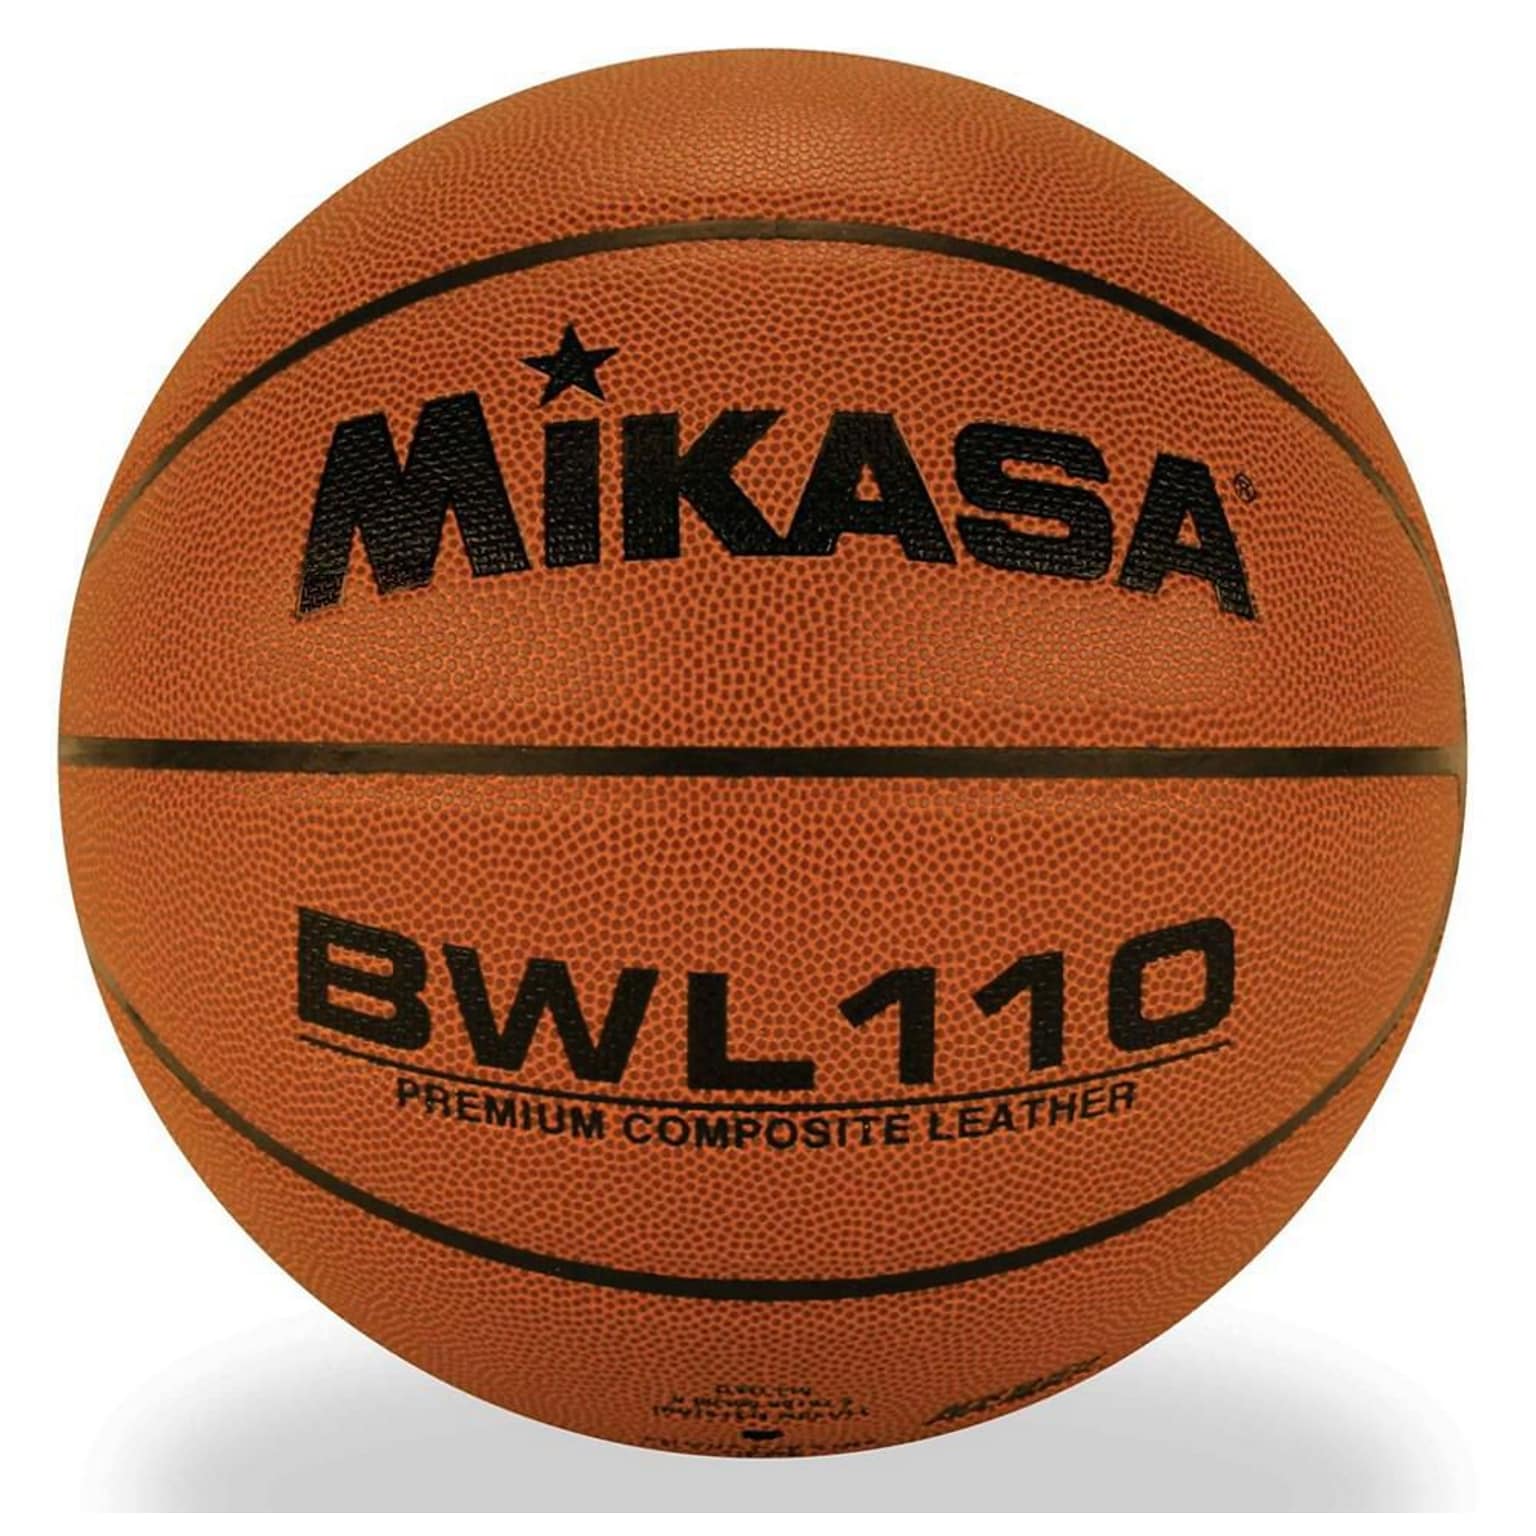 Mikasa® 28 1/2 Compact Womans Composite Leather Basketball, Size 6